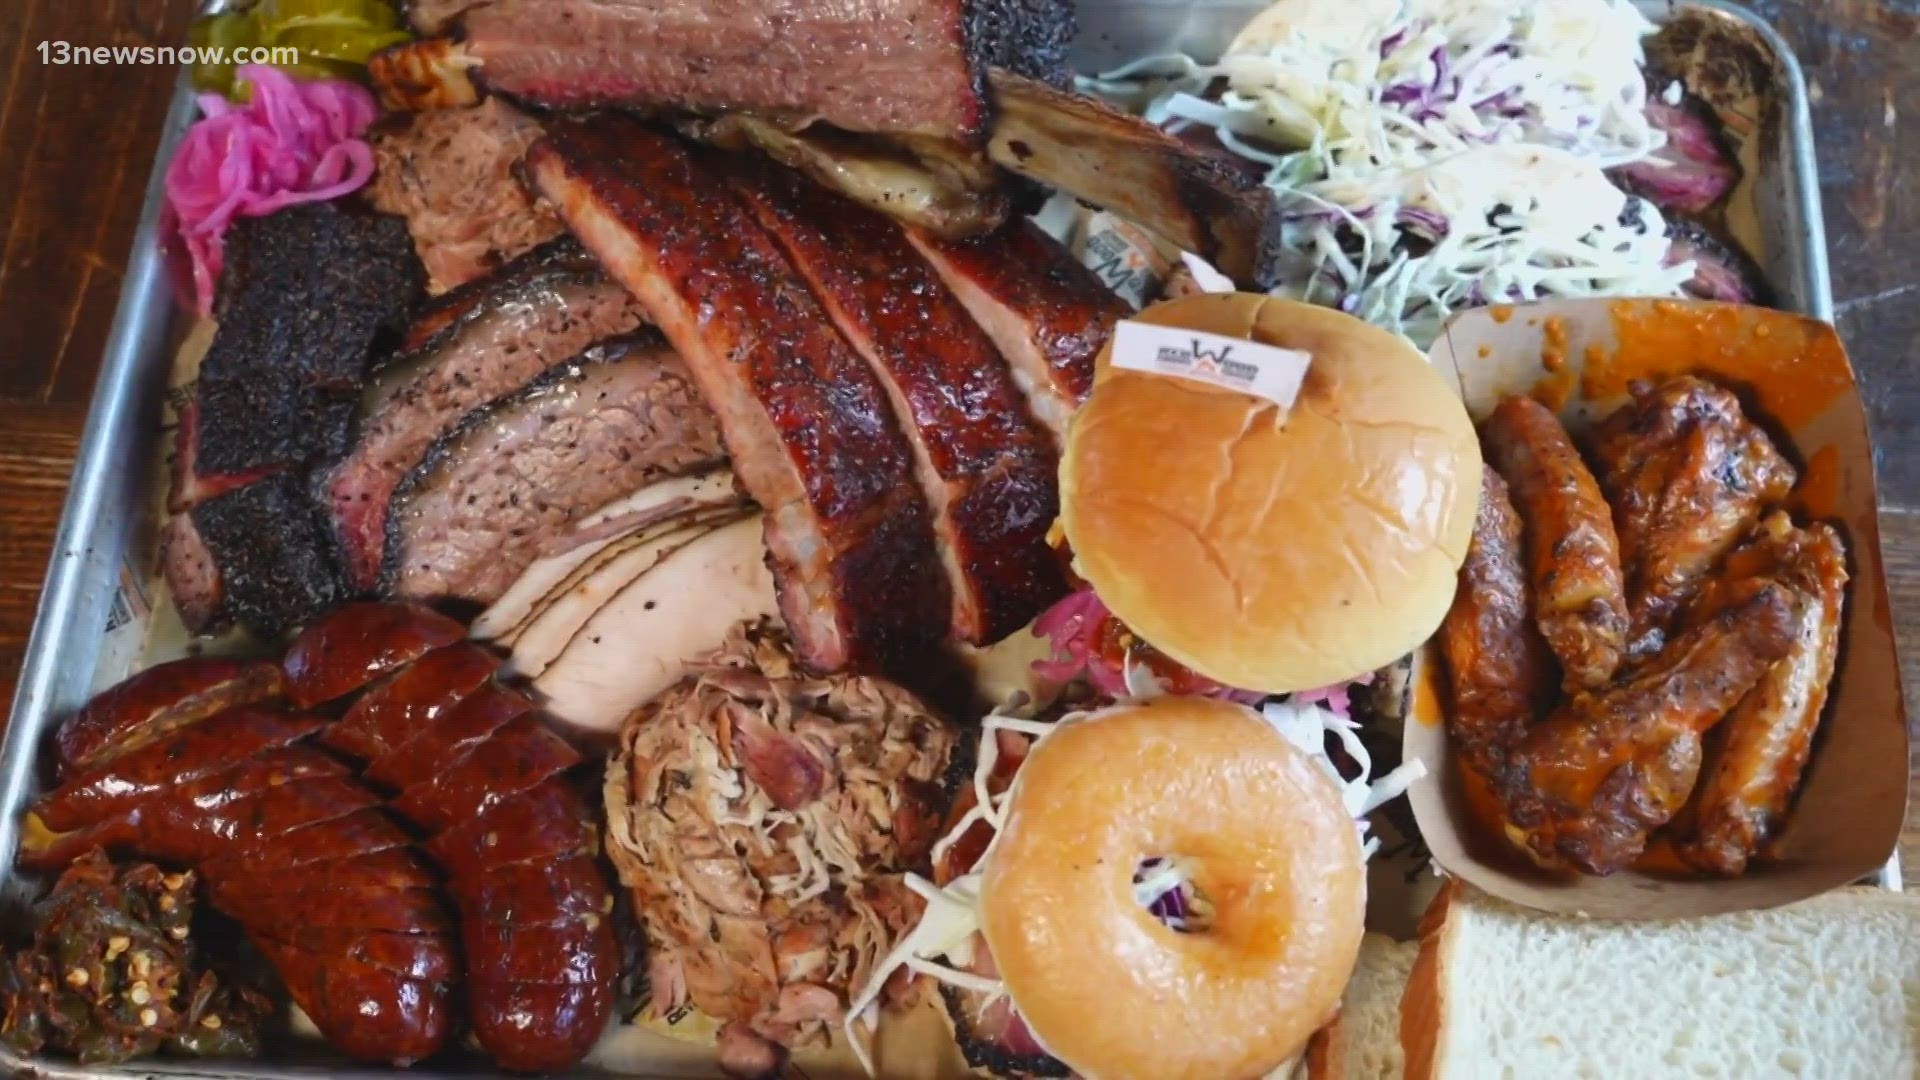 Redwood Smoke Shack has combined the savory and sweet to celebrate Donut Day, but there's delicious BBQ options for the less adventurous too.